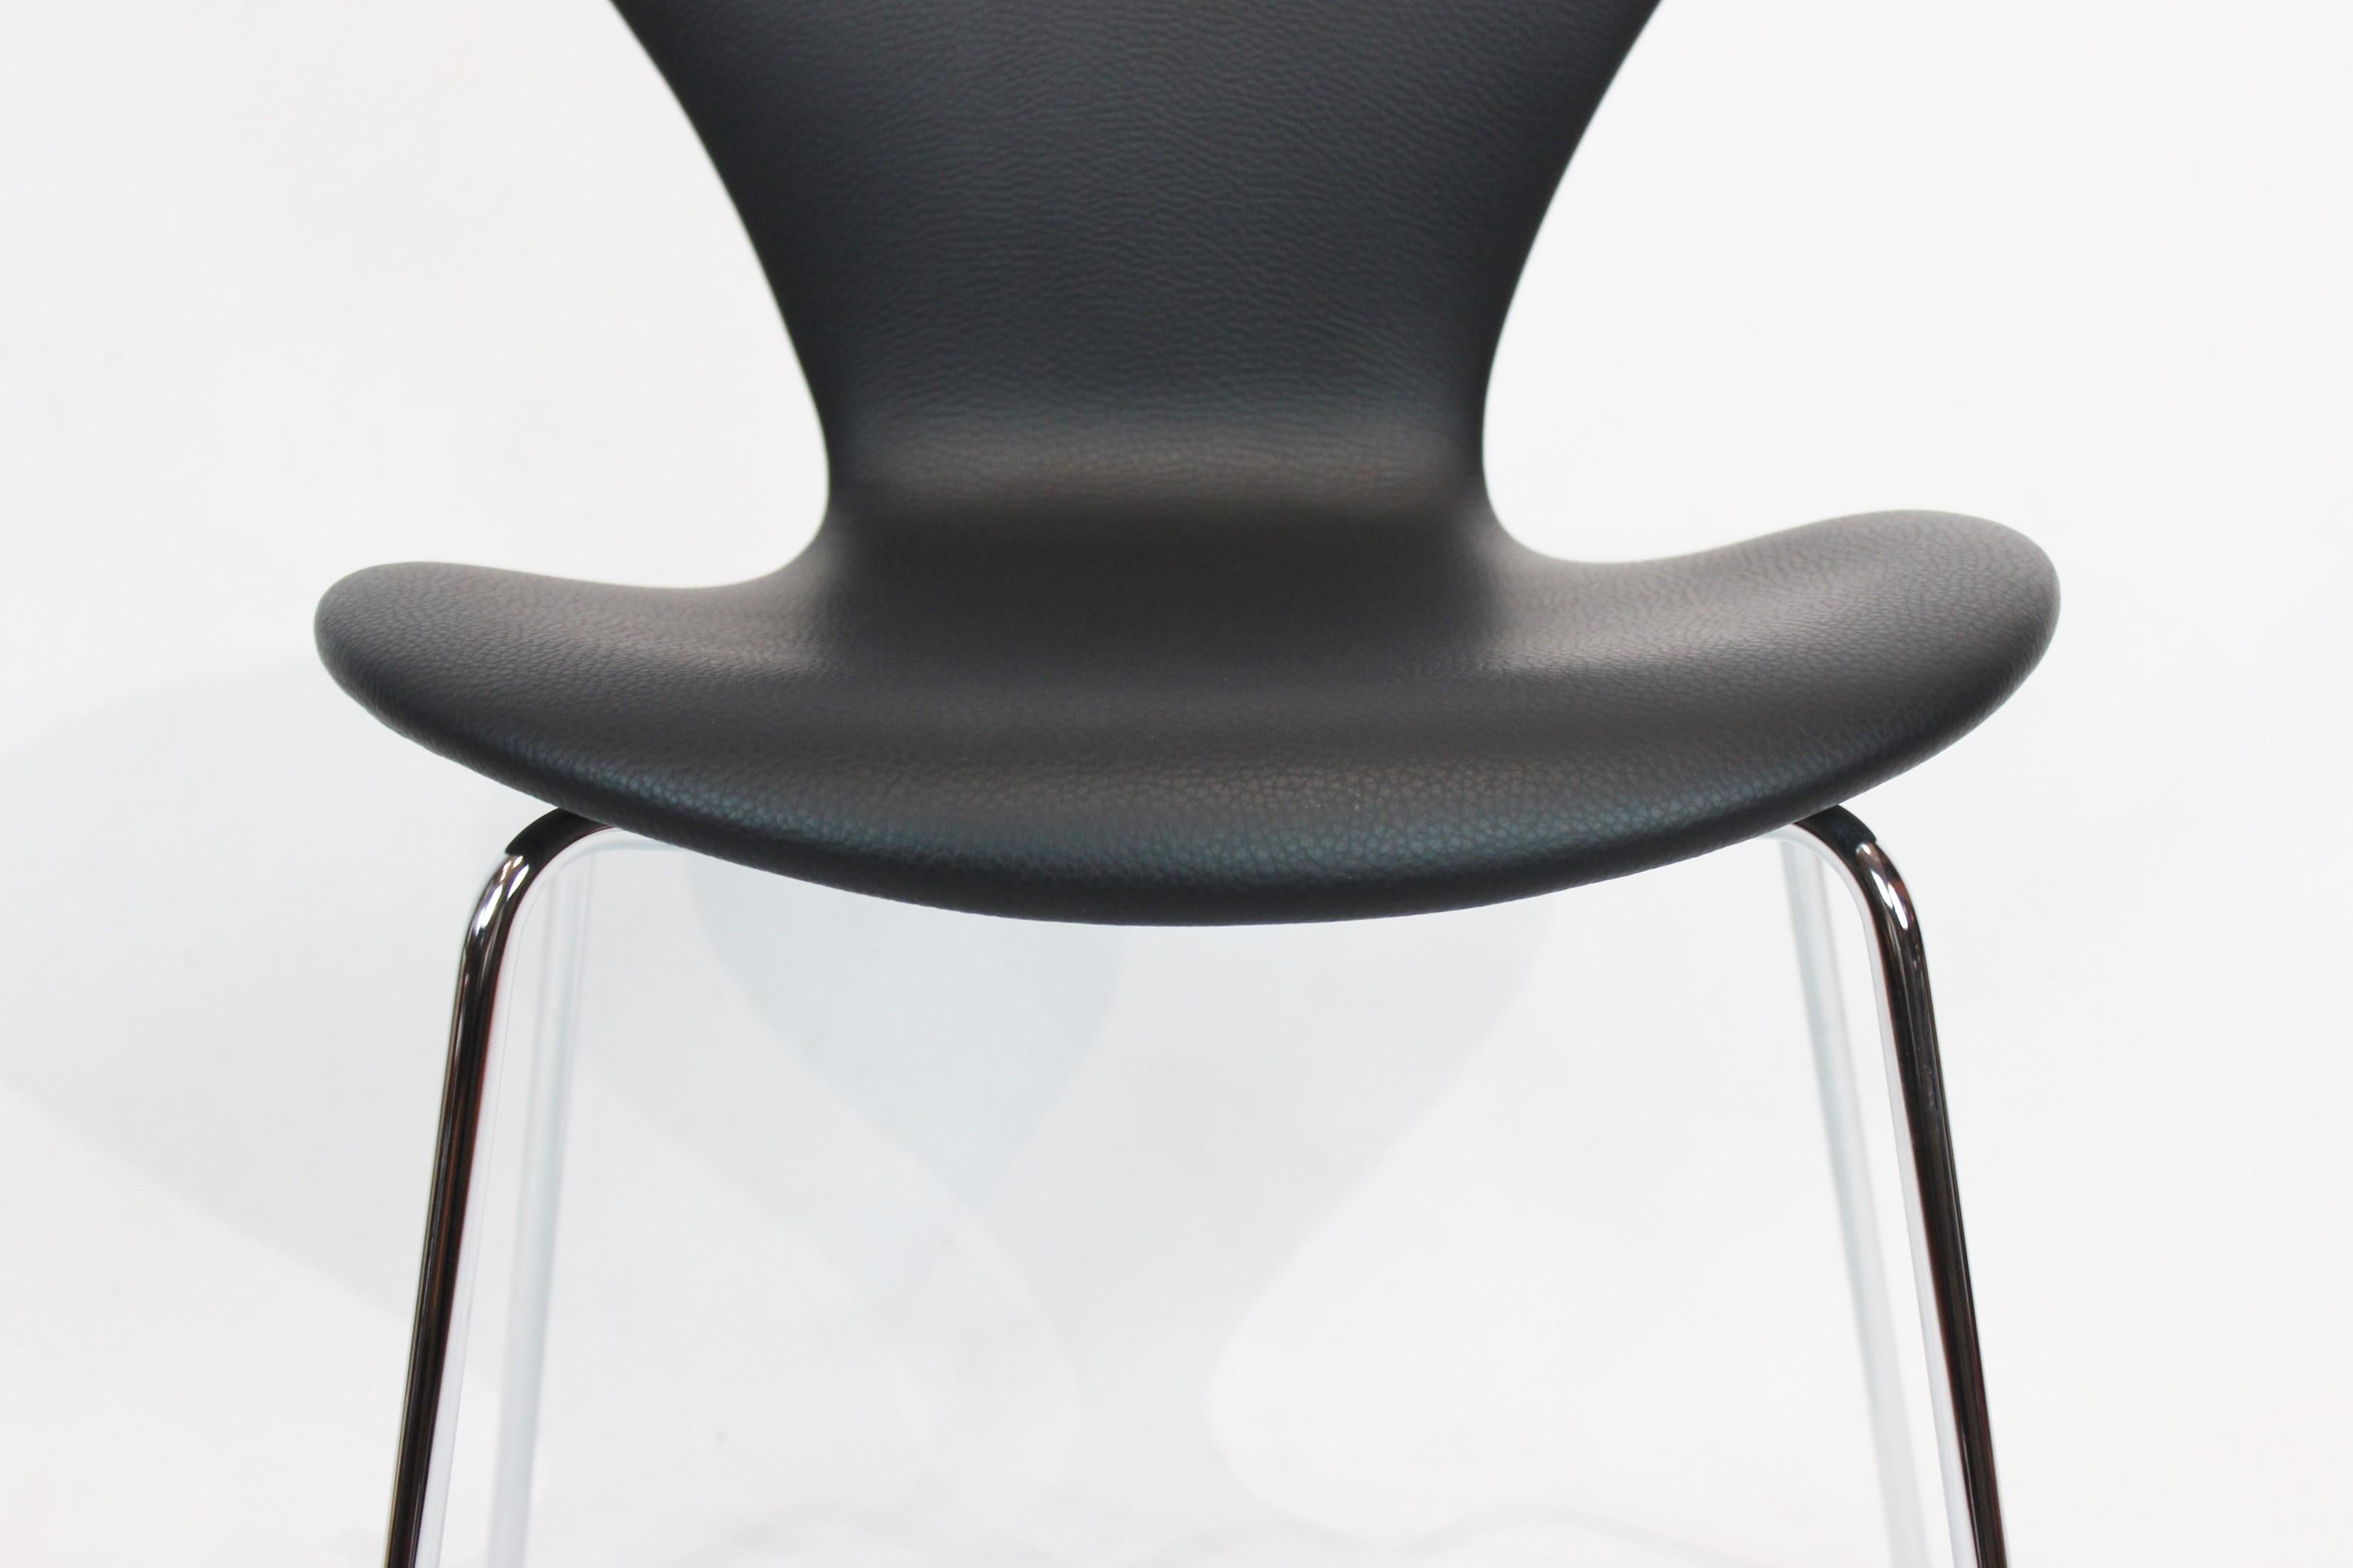 Danish Set of 4 Series 7 chairs, Black Leather, Model 3107, Designed by Arne Jacobsen